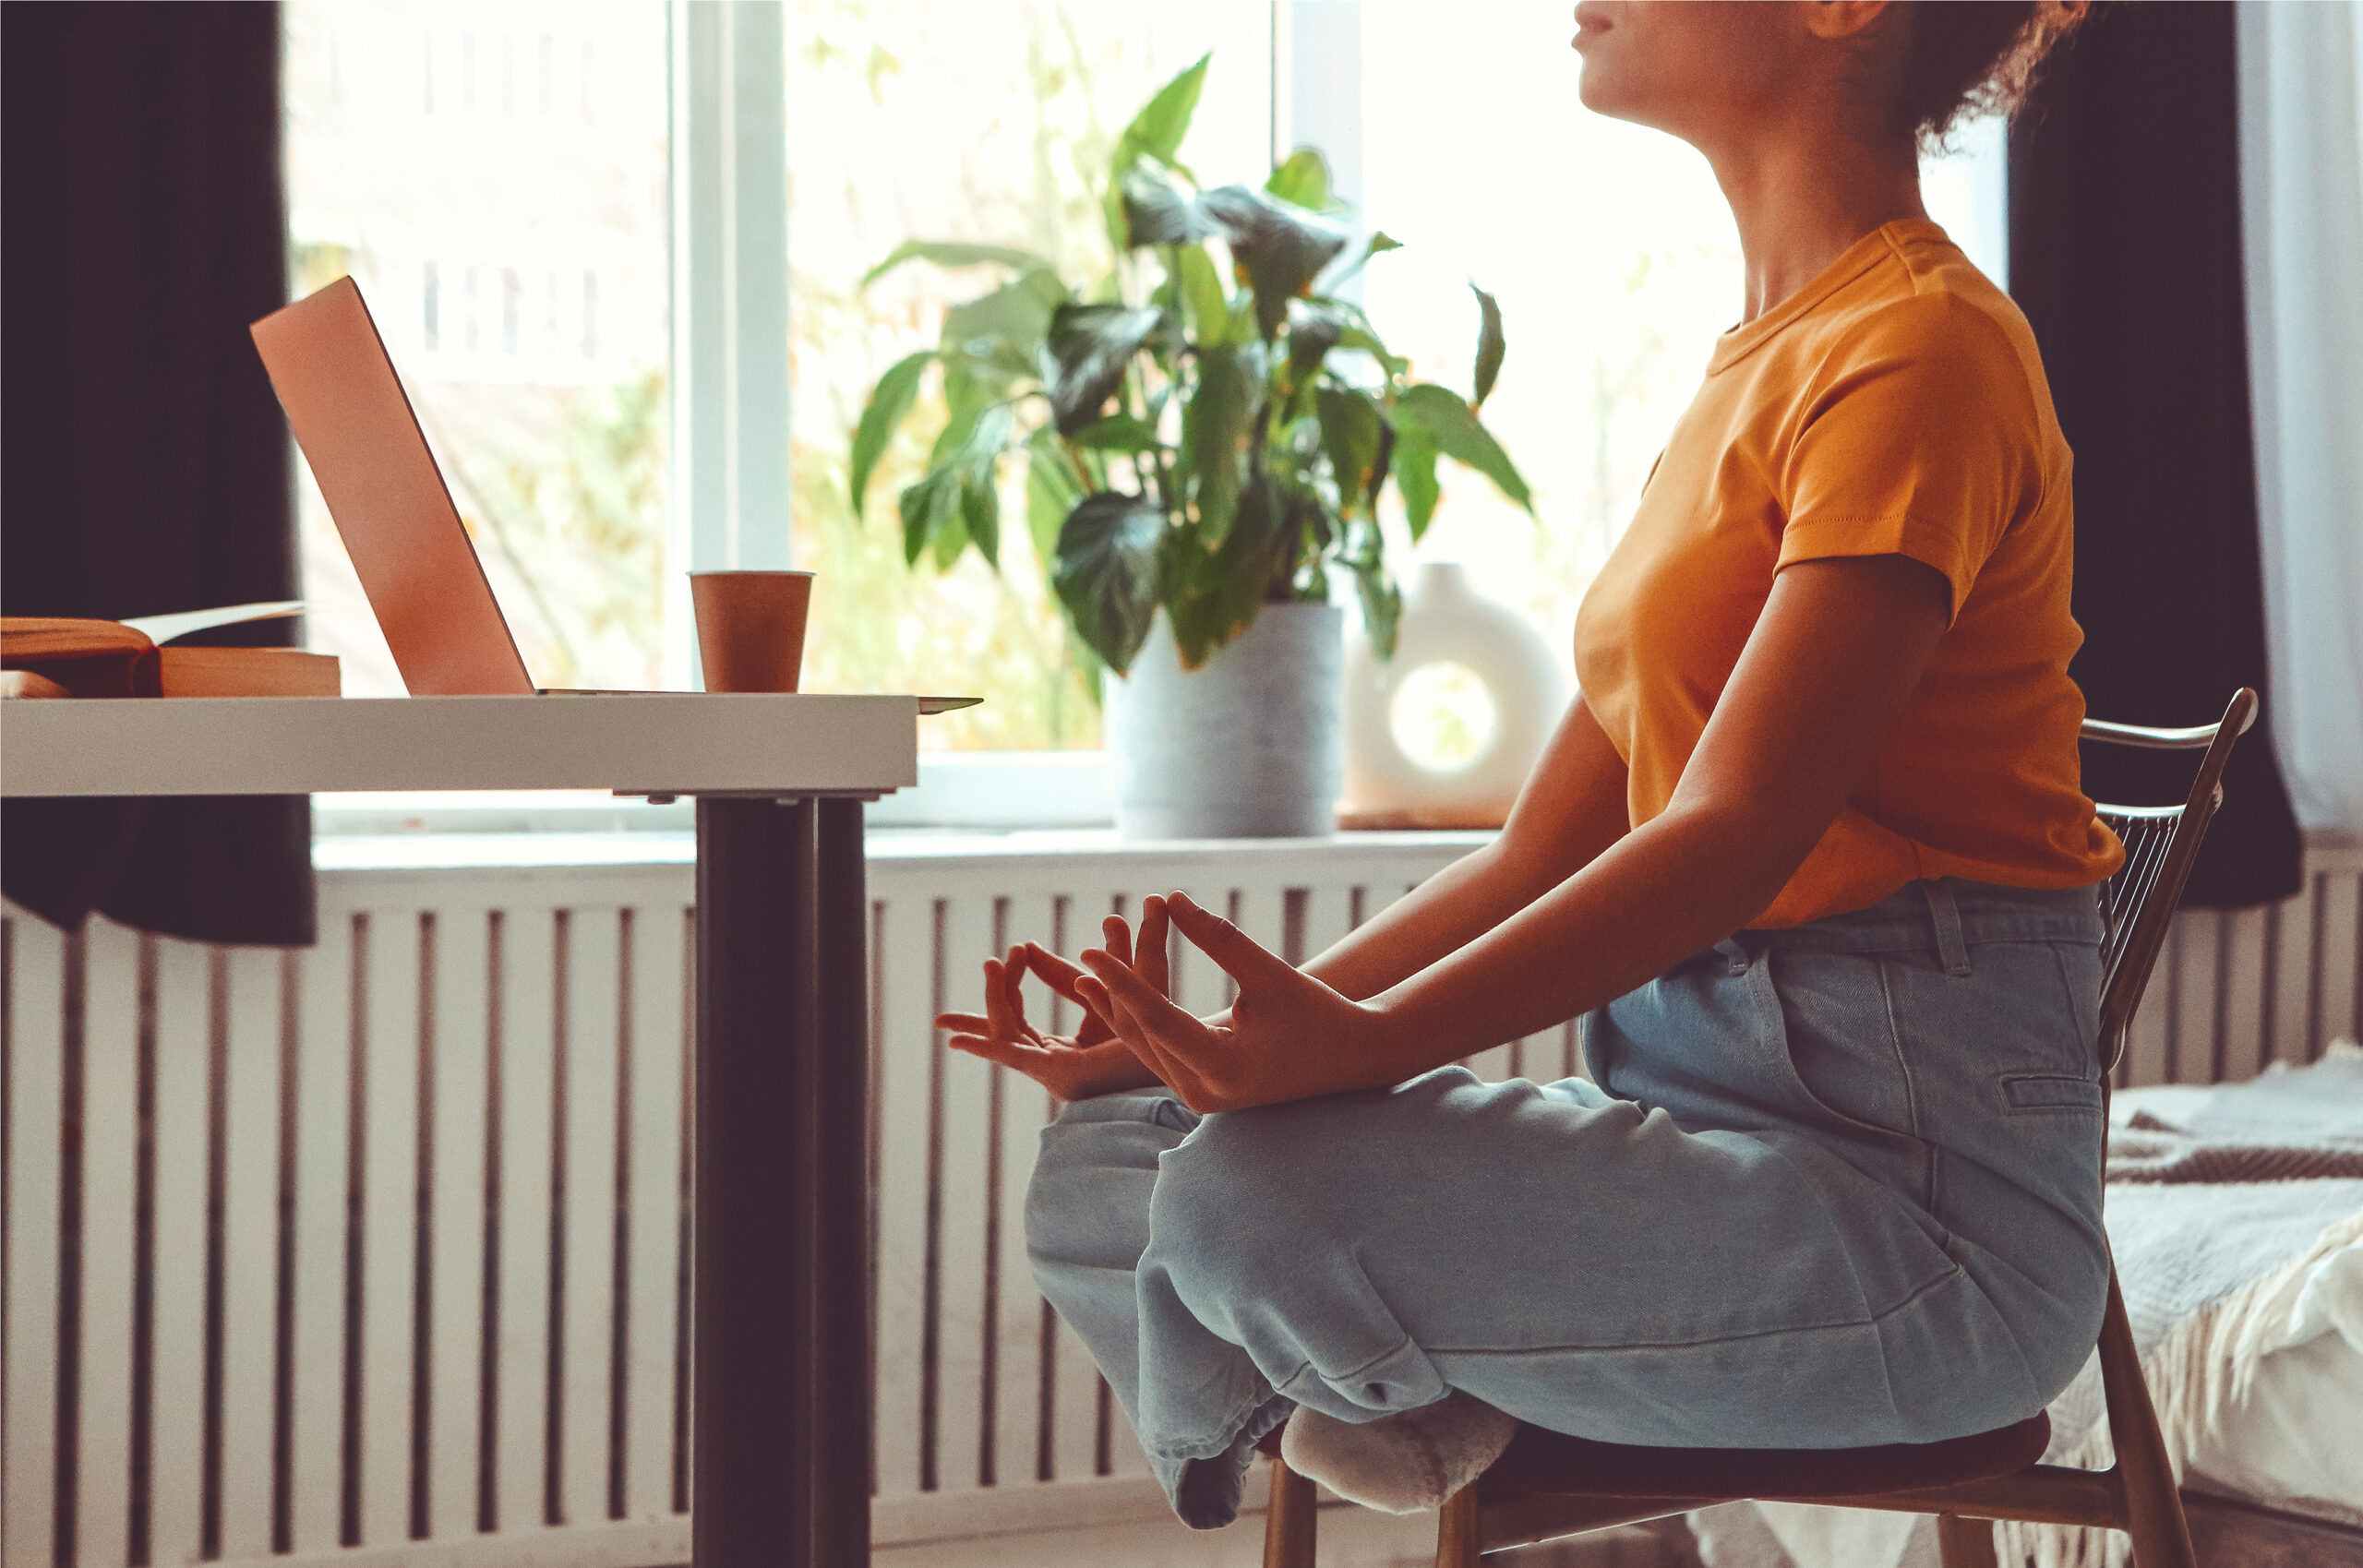 Energy renewal: A woman meditating next to her laptop. [Stressed? Tired? Feeling Burnt Out? Here's How to Renew Your Energy]